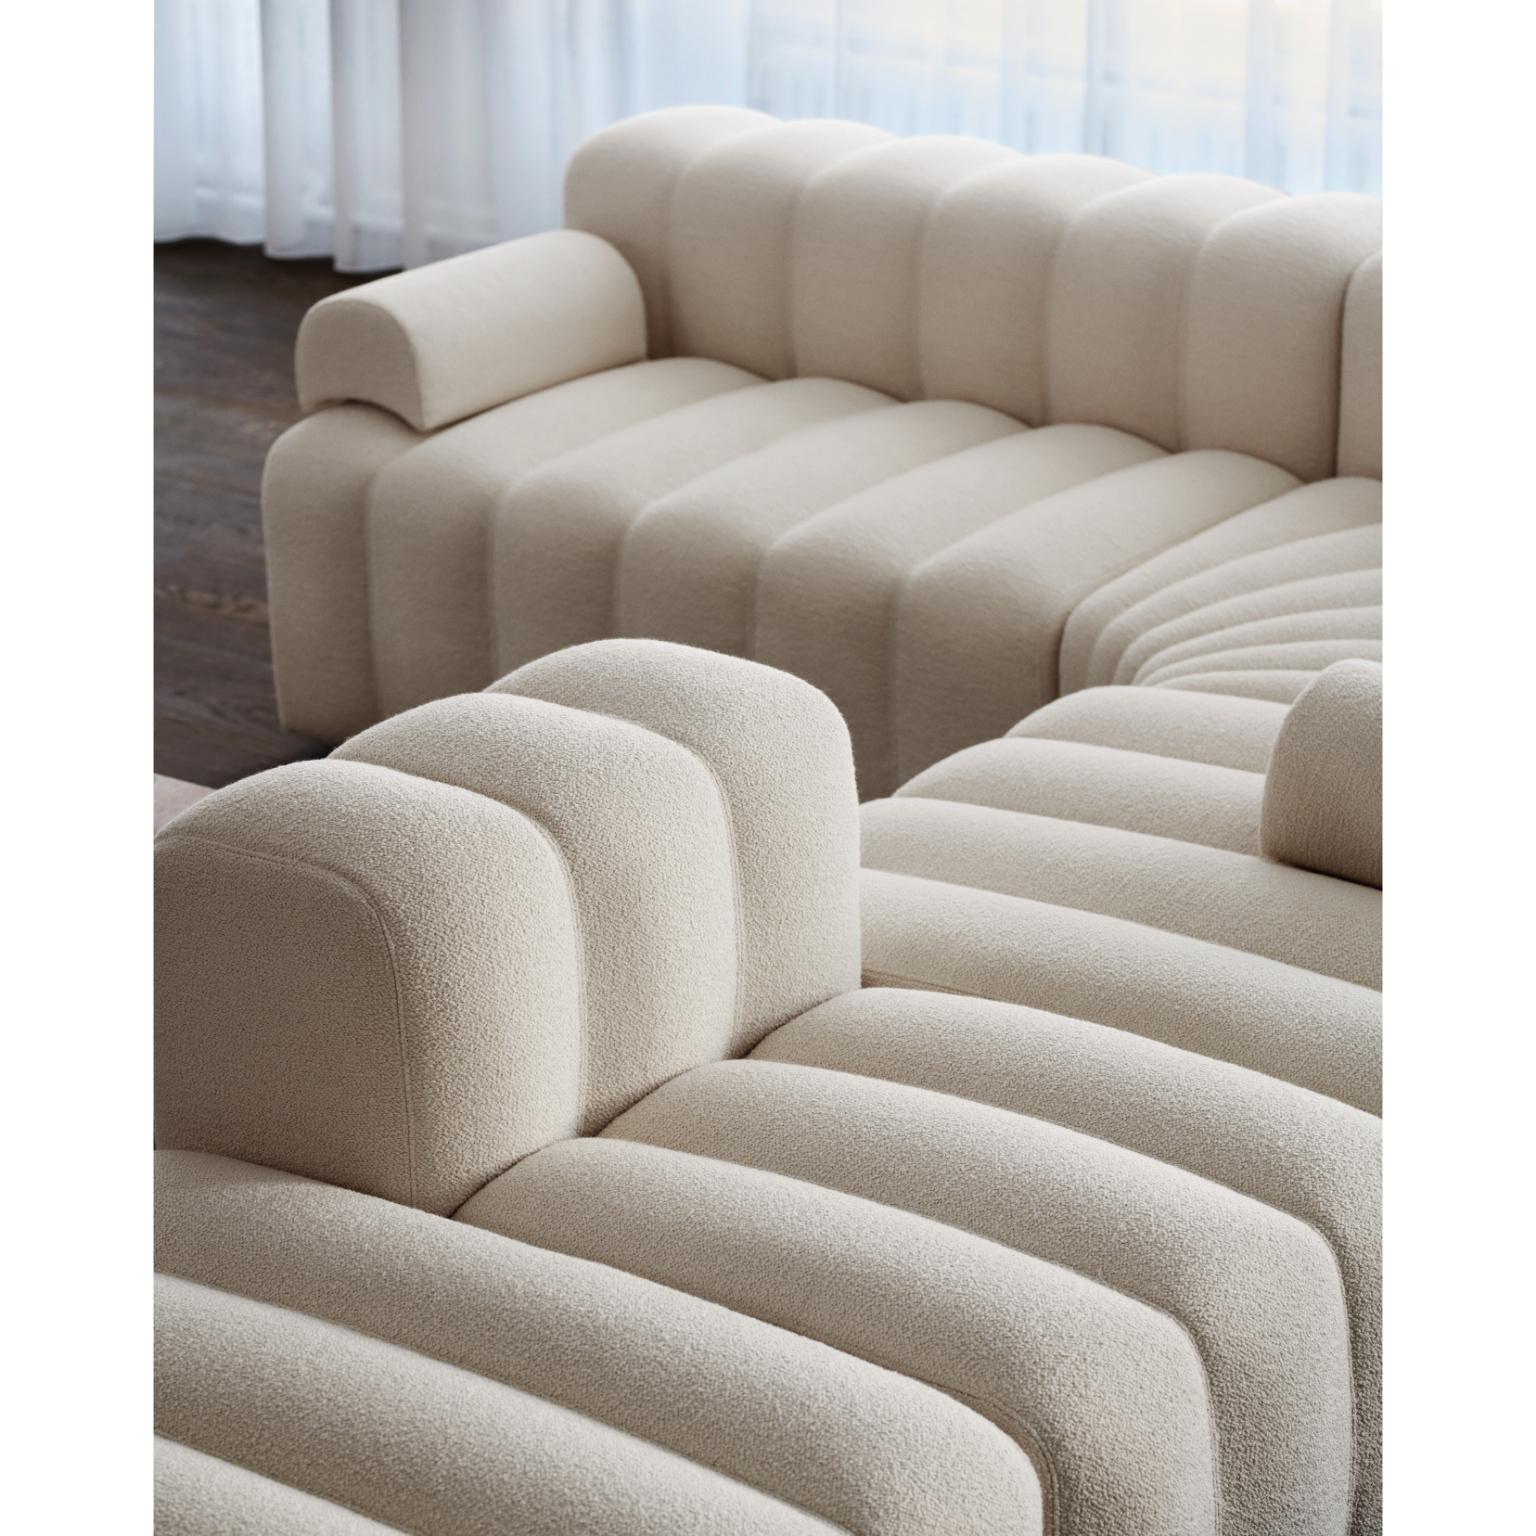 Studio Lounge Large Right Modular Sofa With Armrest by NORR11
Dimensions: D 130 x W 153 x H 70 cm. SH 47 cm. 
Materials: Foam, wood and upholstery.
Upholstery: Barnum Boucle Color 3.

Available in different upholstery options. A plywood structure